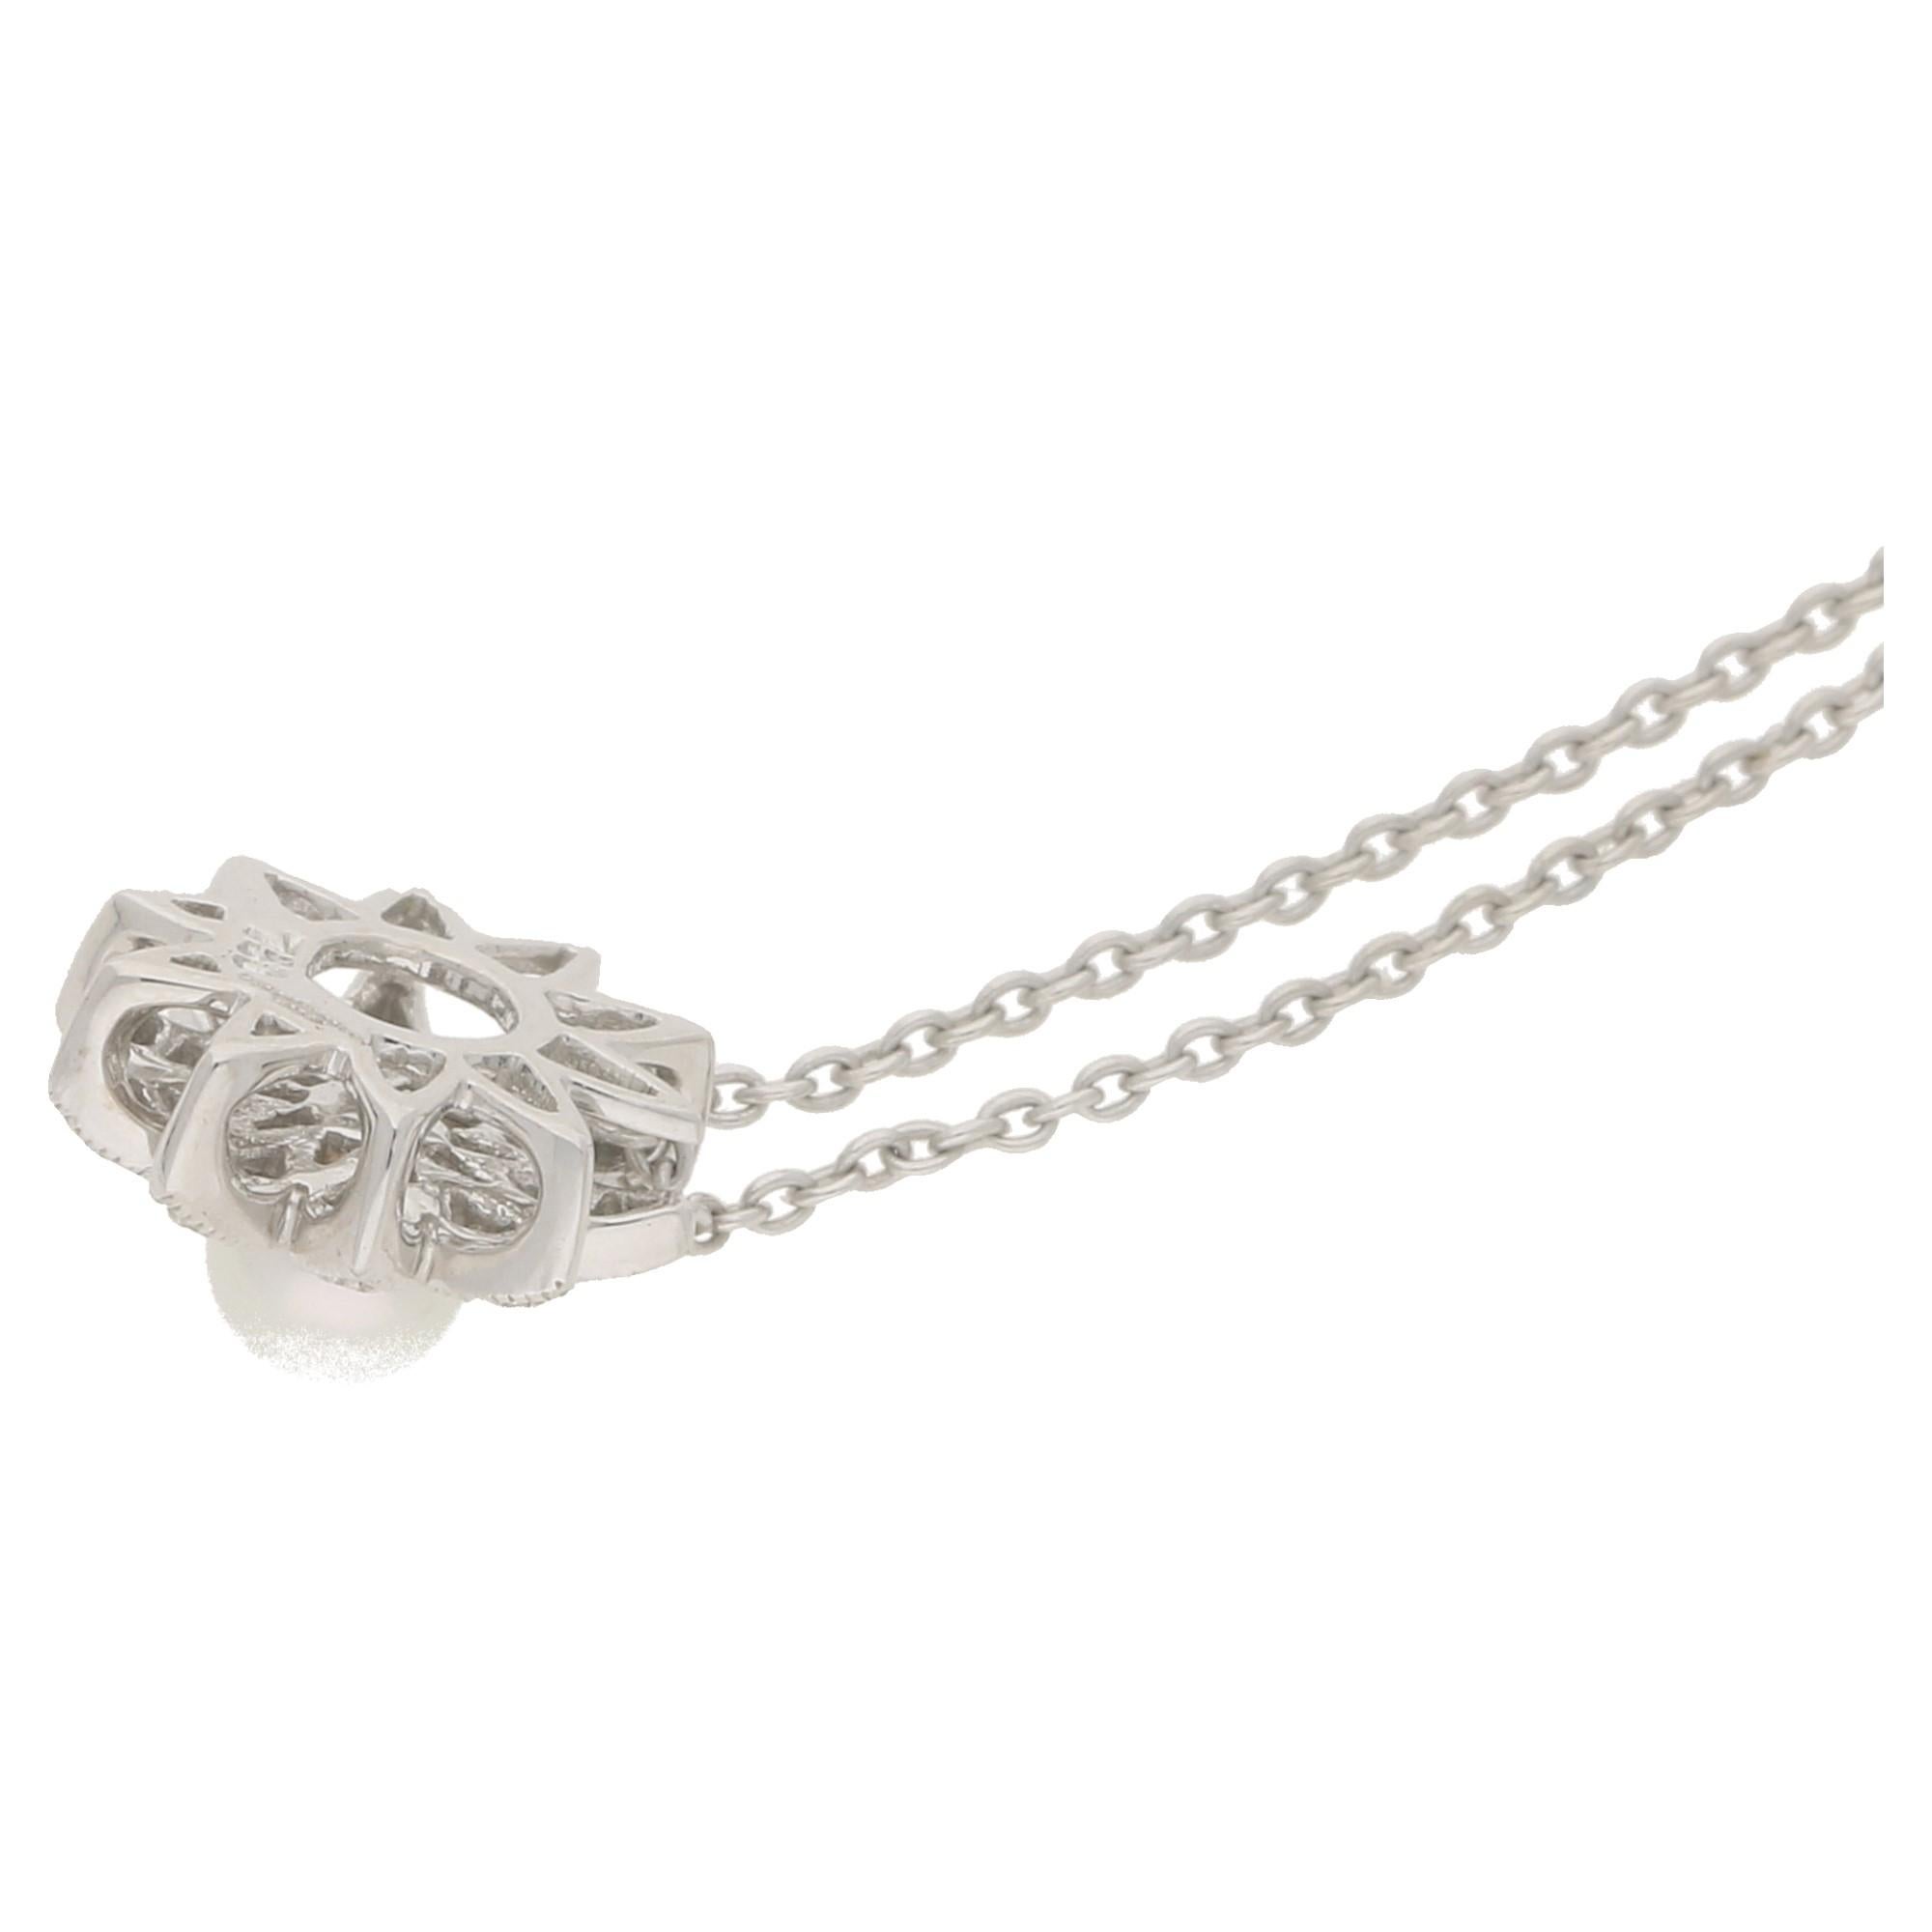 A contemporary and very chic floral pendant with a central pearl surrounded by brilliant-cut diamonds totaling 0.08ct set in 18ct white gold suspended on a 16 inch white gold chain which is included with this item.